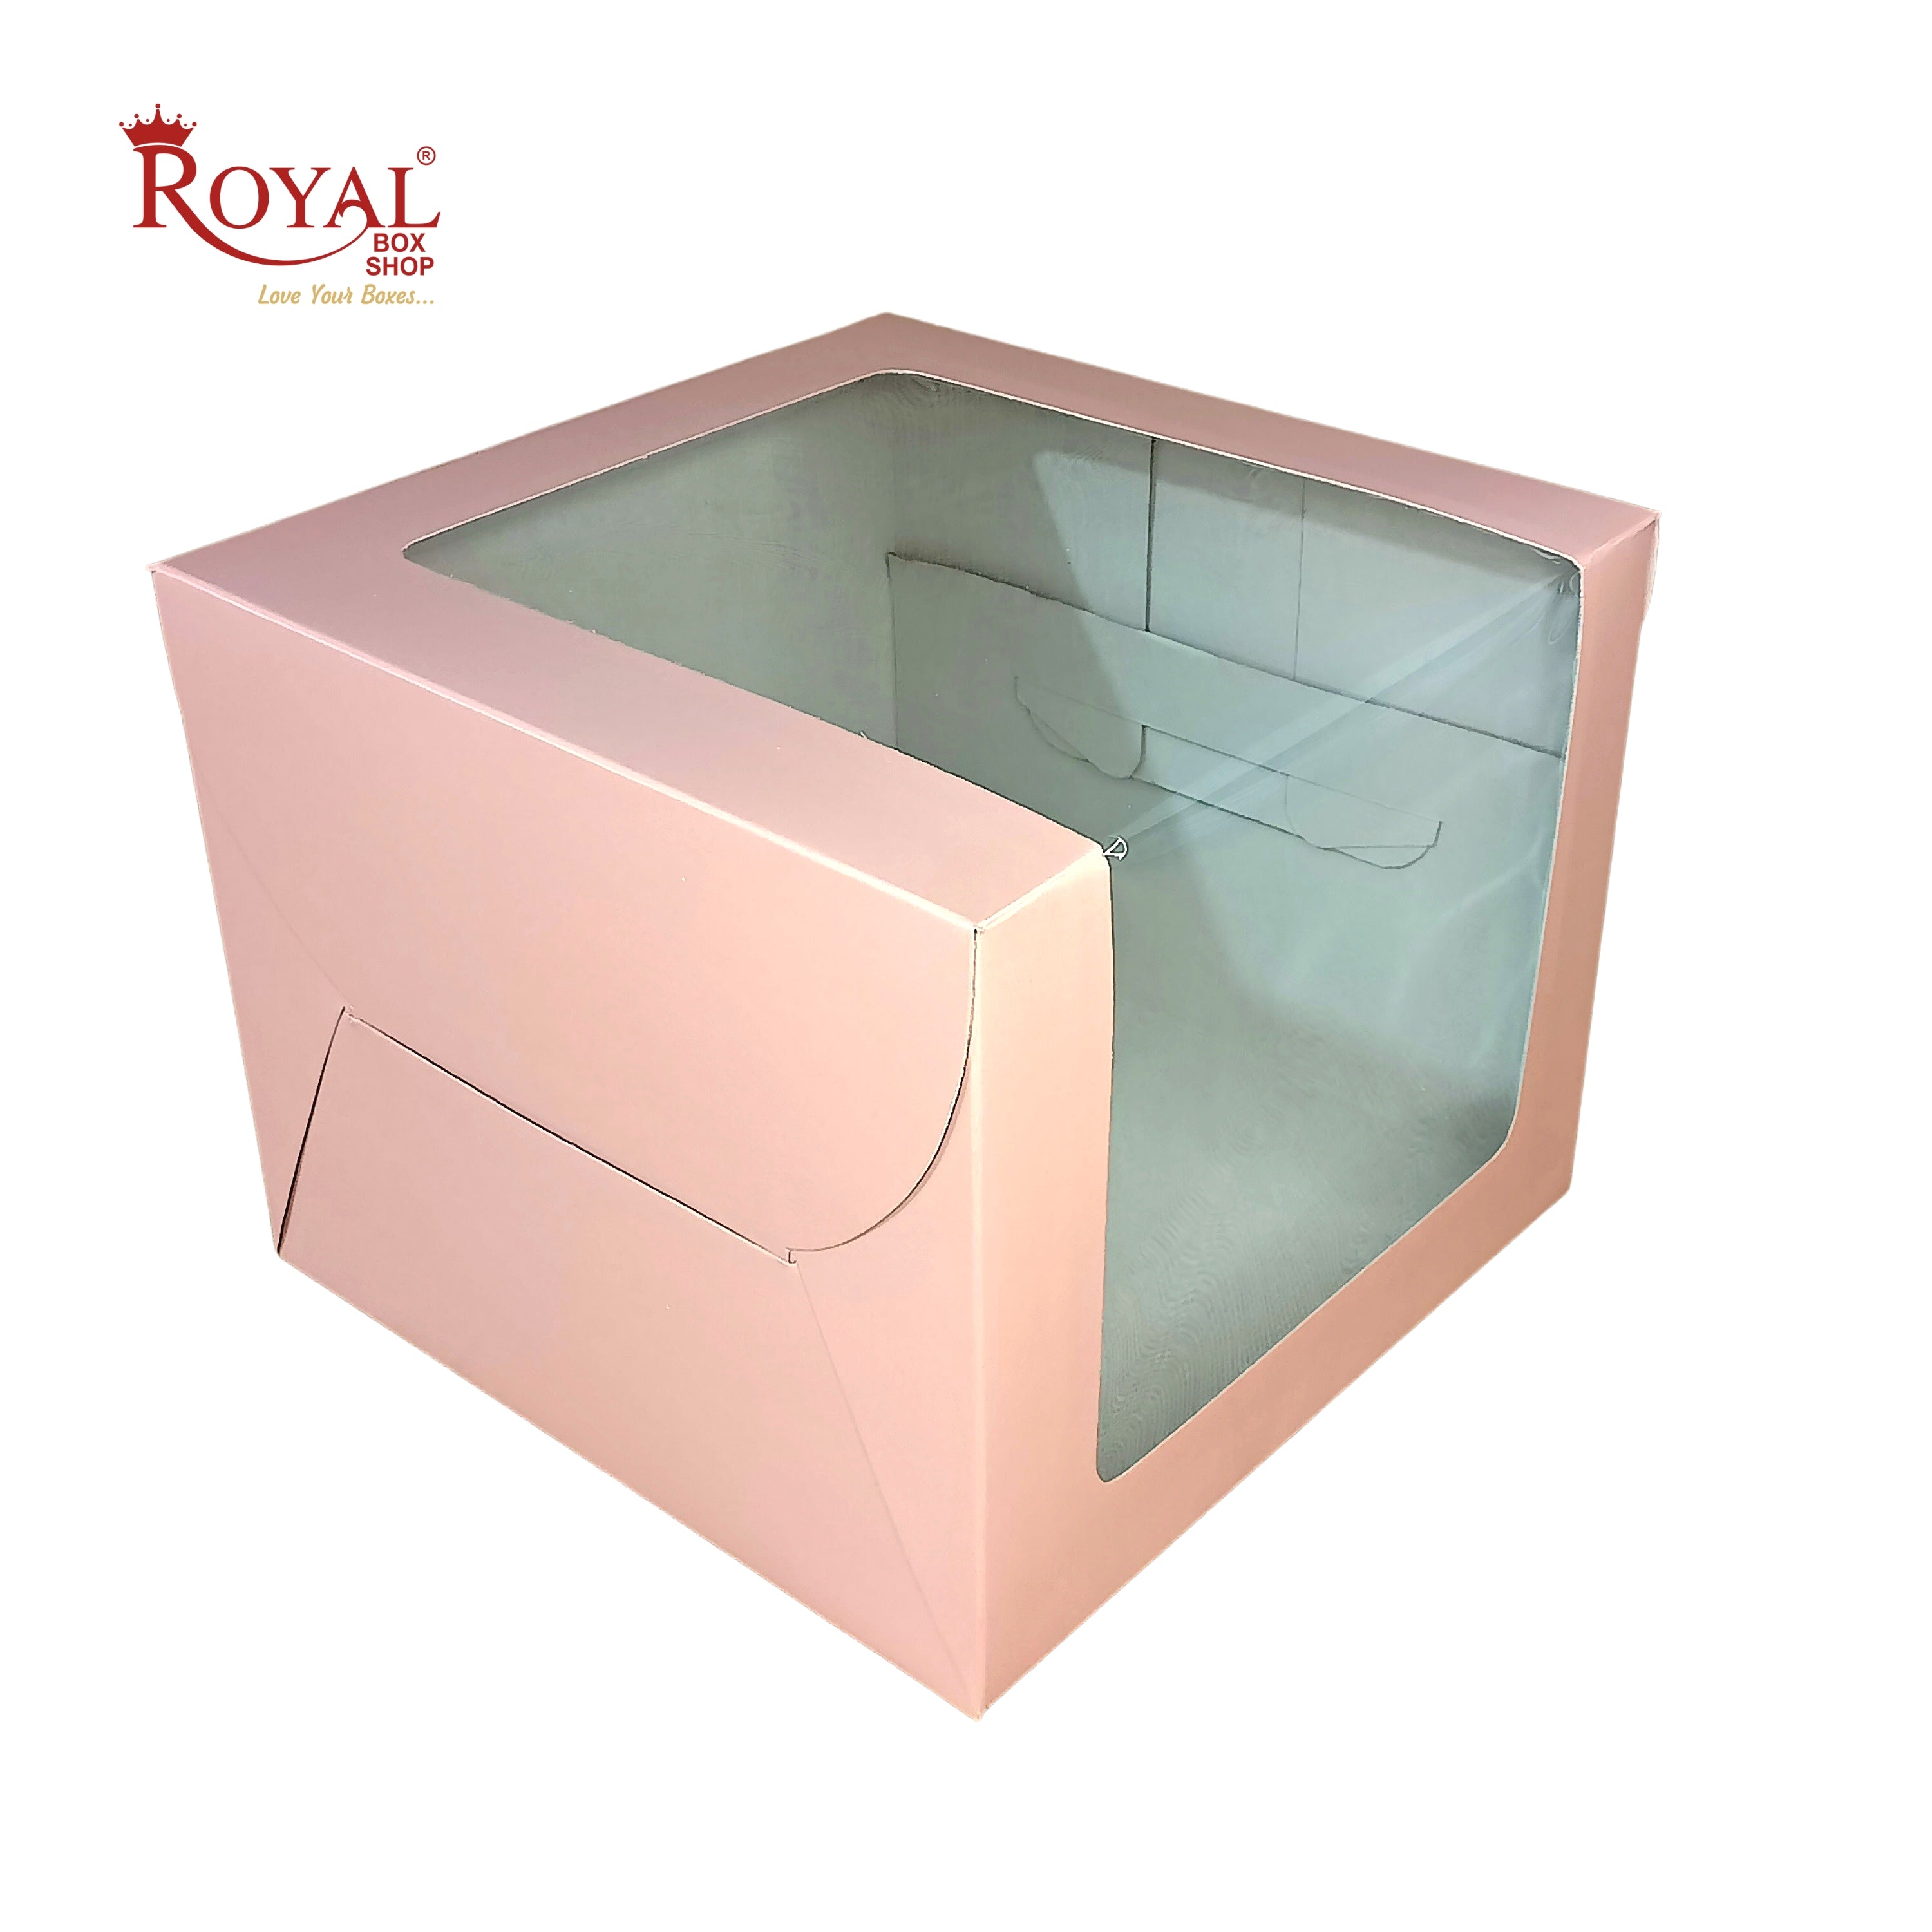 China Factory Clear Plastic Tall Cake Boxes, Bakery Cake Box Container,  Square with Lids 220x220x300mm in bulk online - PandaWhole.com